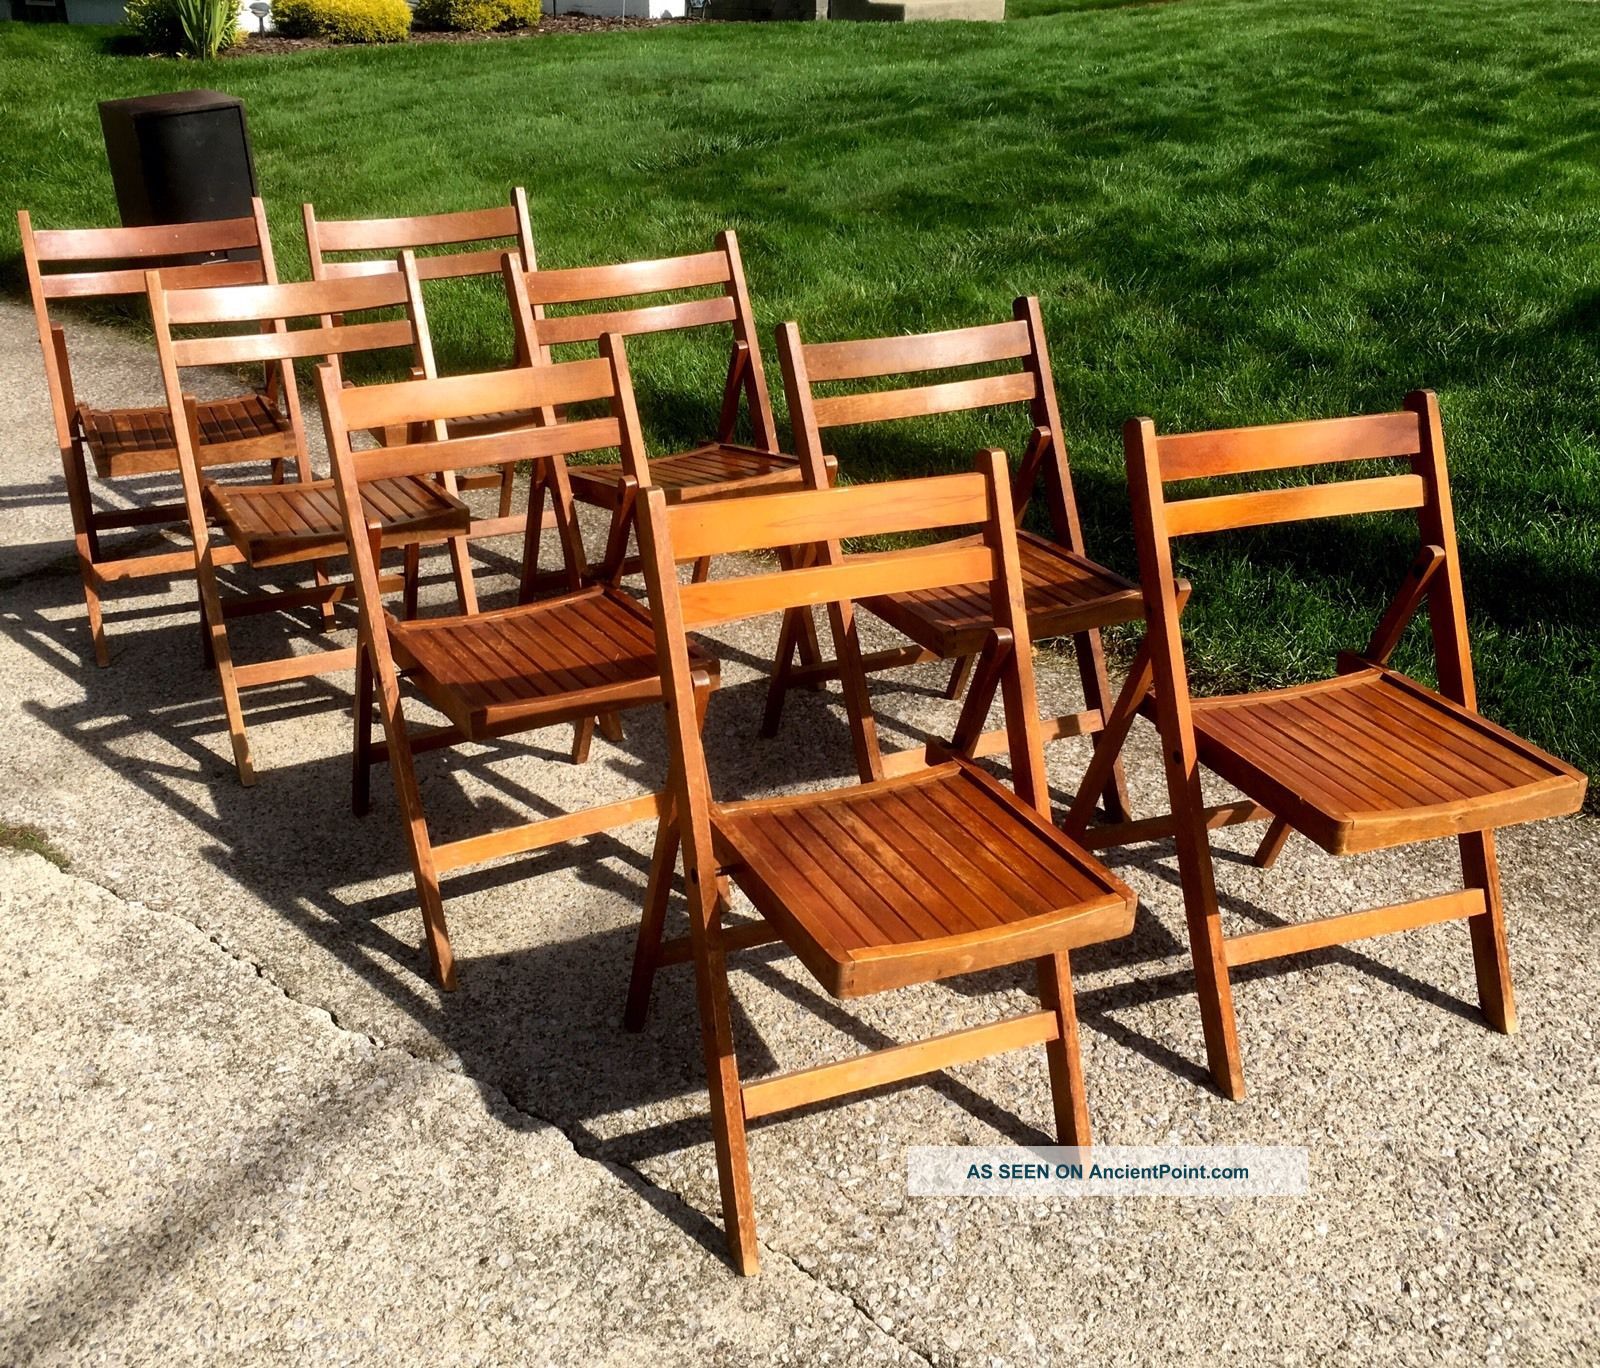 8 Vintage Mid Century Modern Wood Slatted Folding Chairs Made In Romania 1900-1950 photo